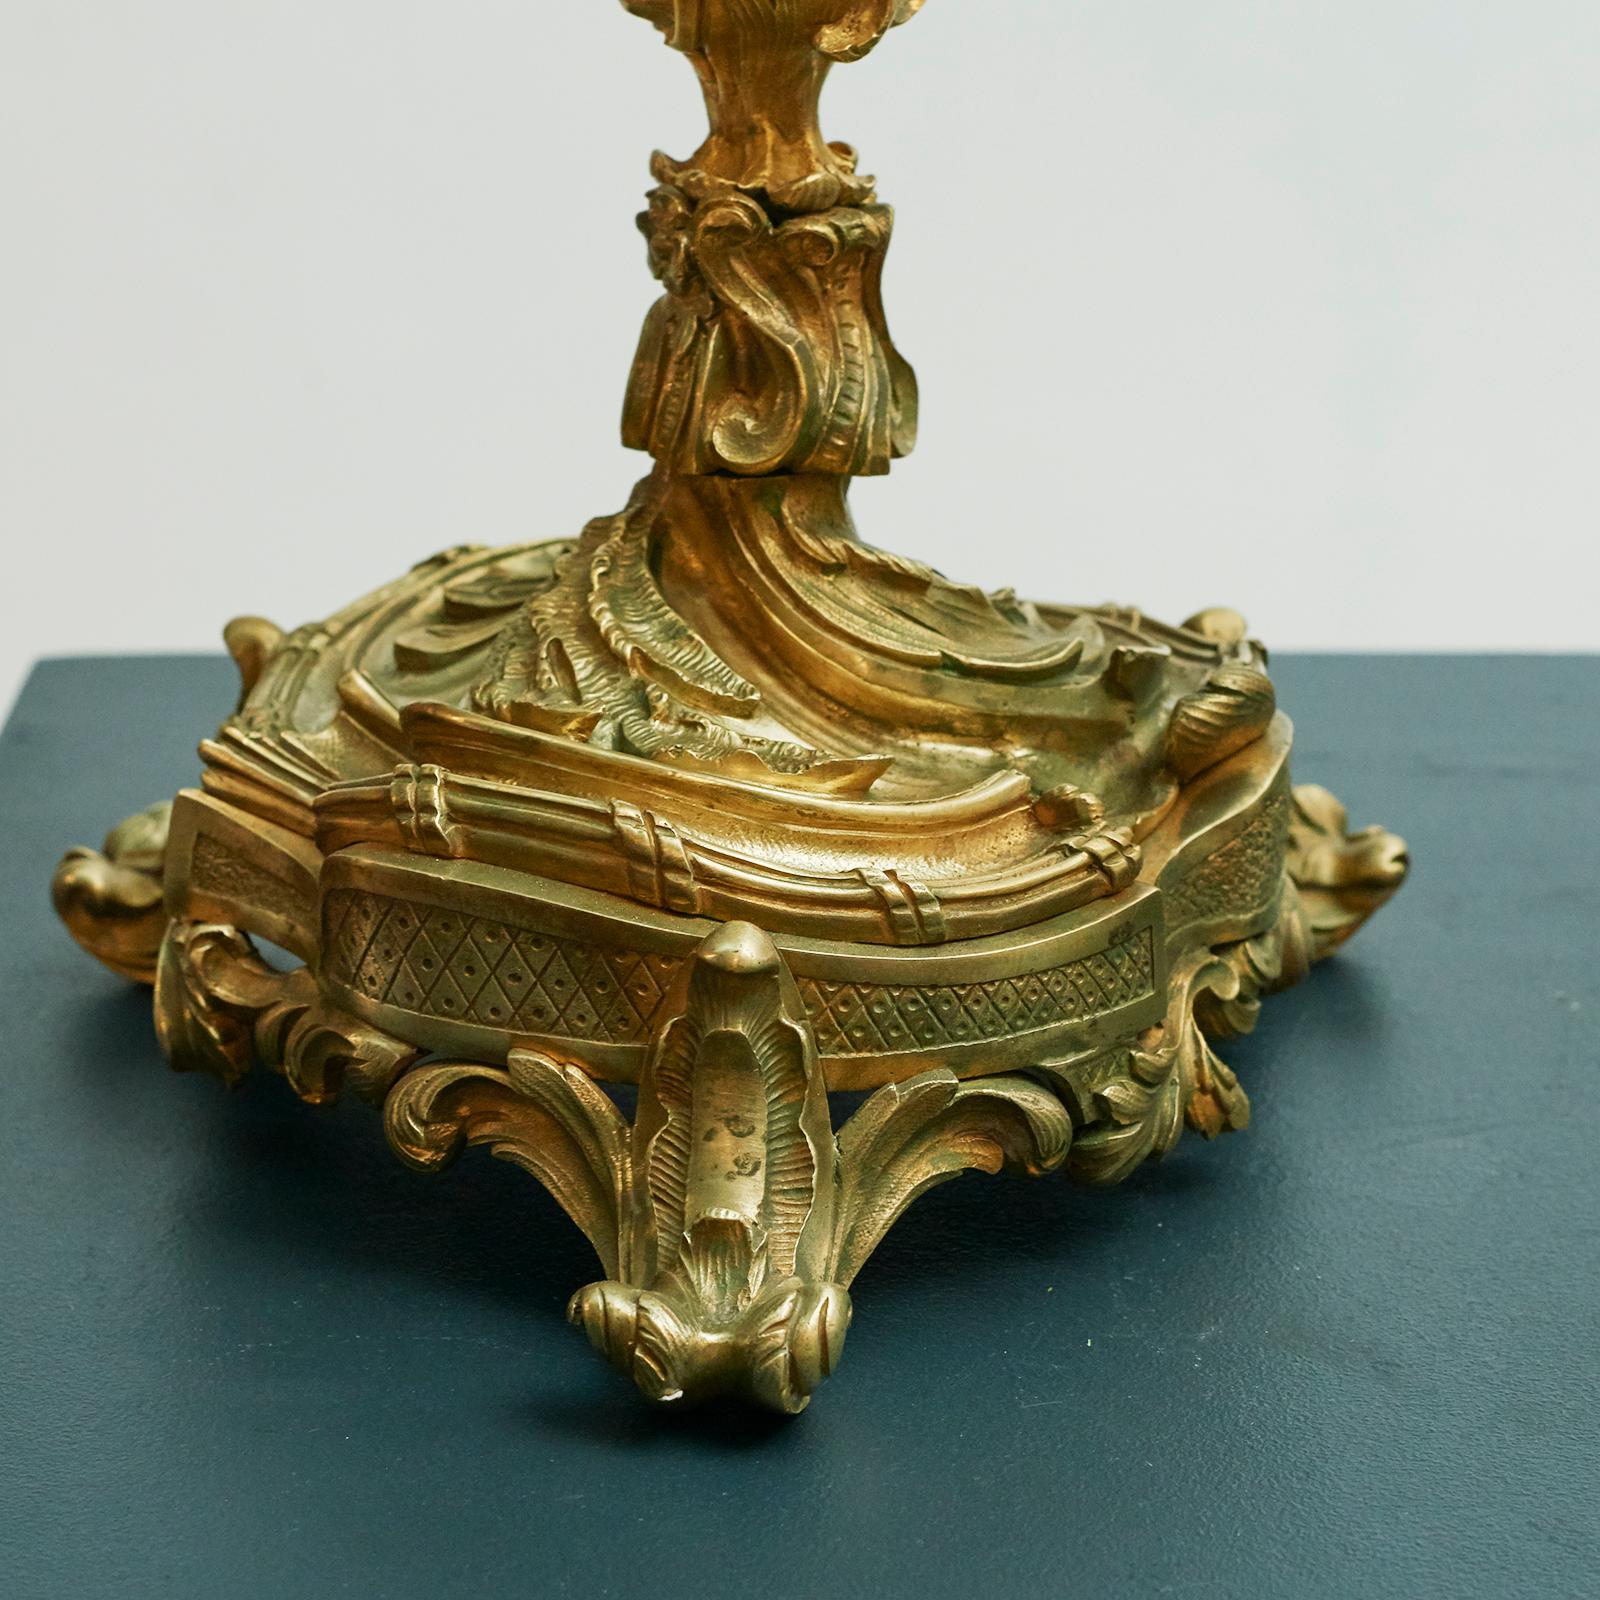 Pair of new Rococo gilt bronze candelabra with 5 arms,
France, circa 1860.
Sold as pair.